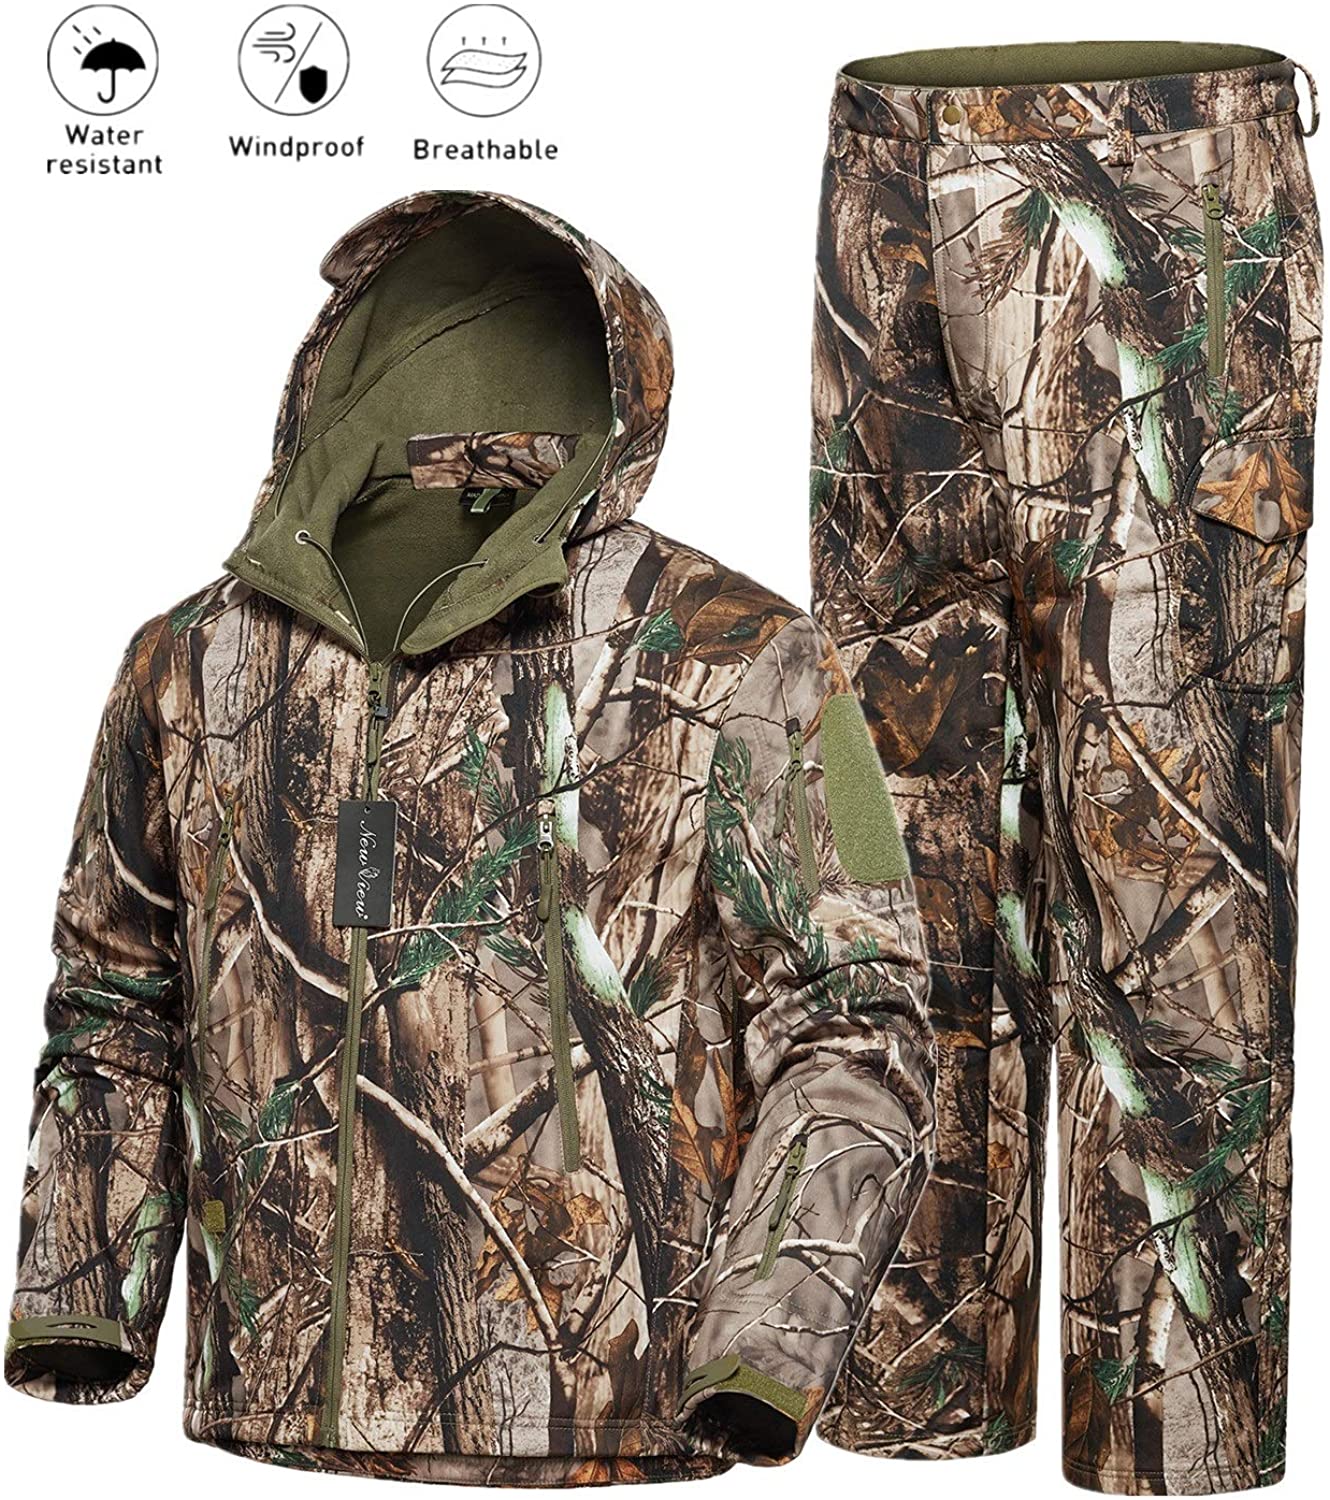 Best Hunting Rain Gear Expert's Top 10 Review For 2021